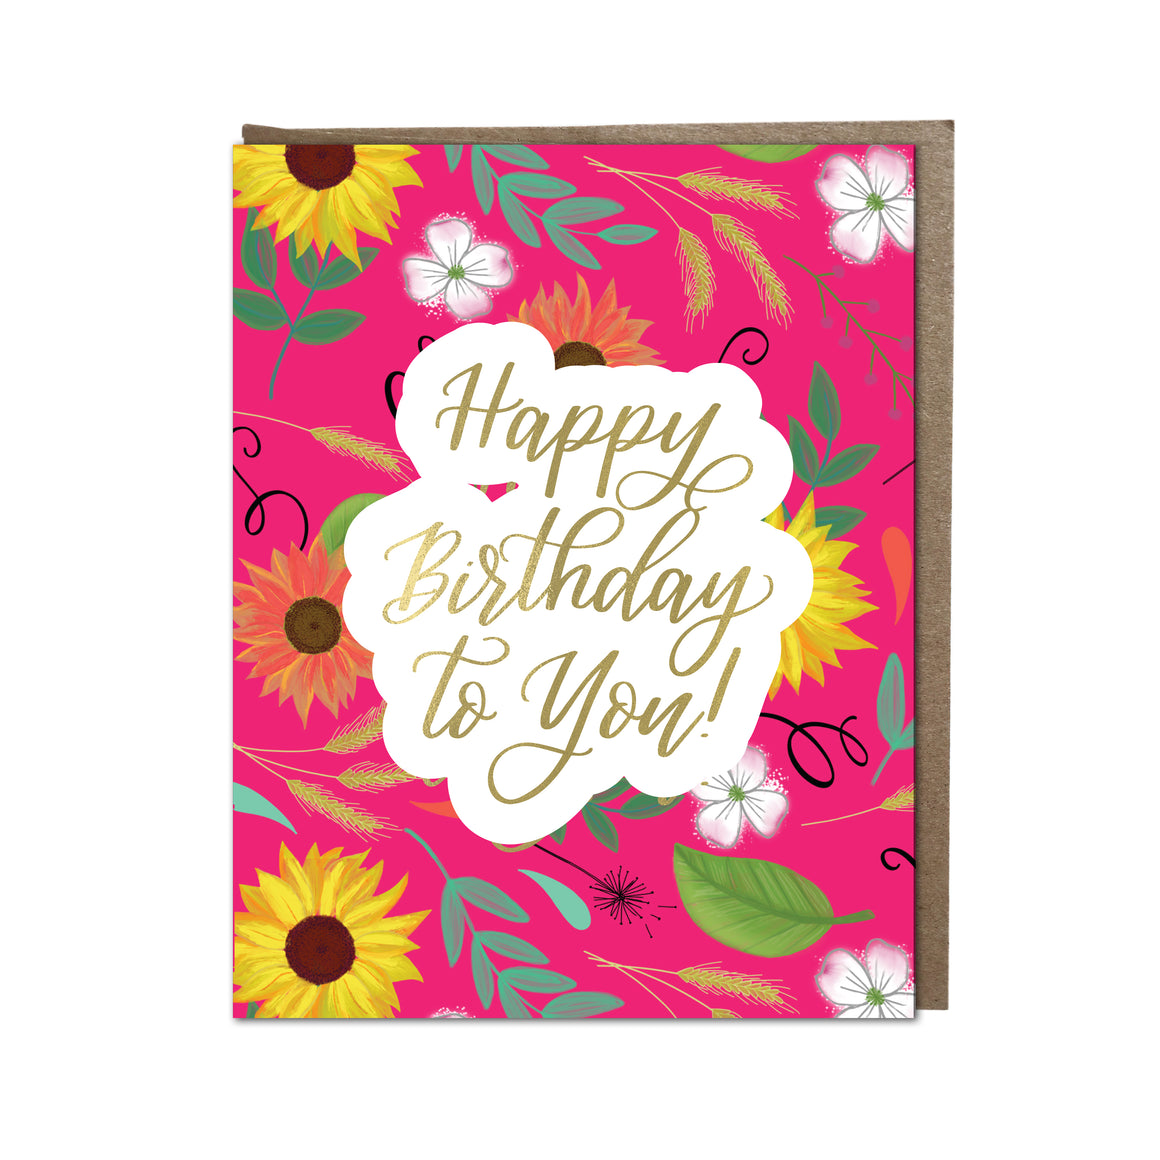 "Happy Birthday to You!" card